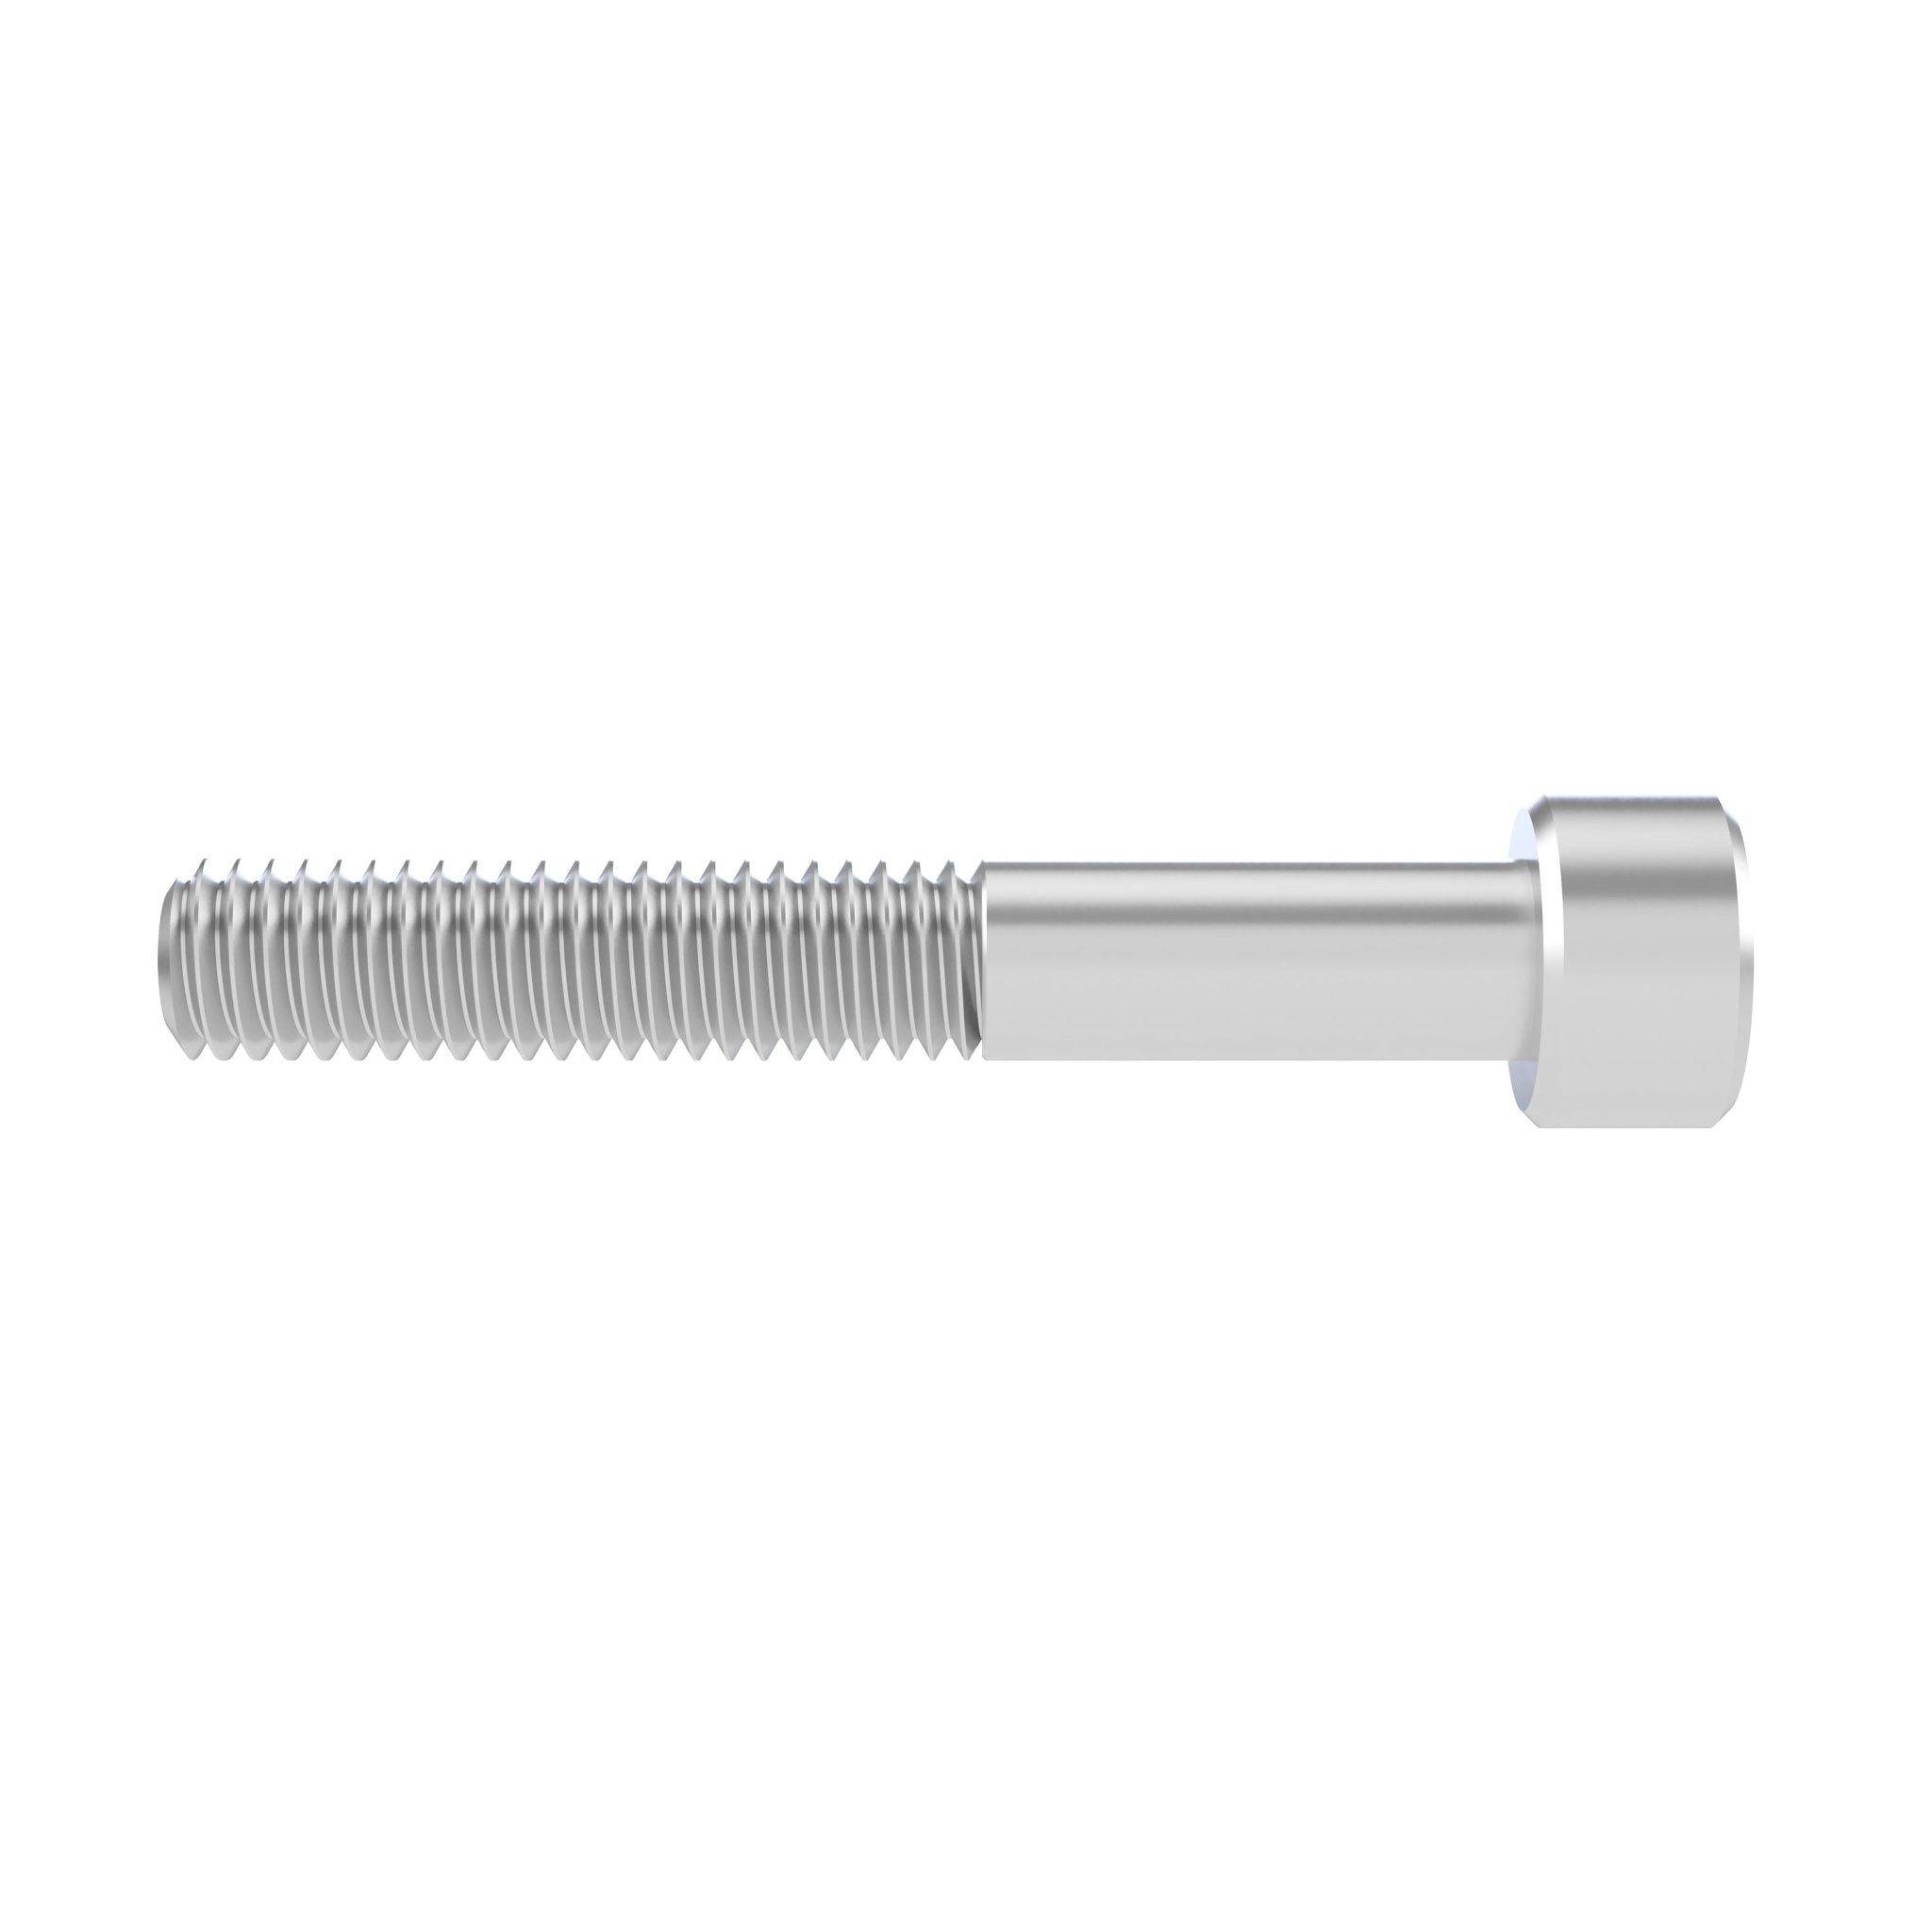 M6-1.0 X 40mm Penta Pin Security Bolts - Bicycle Bolts